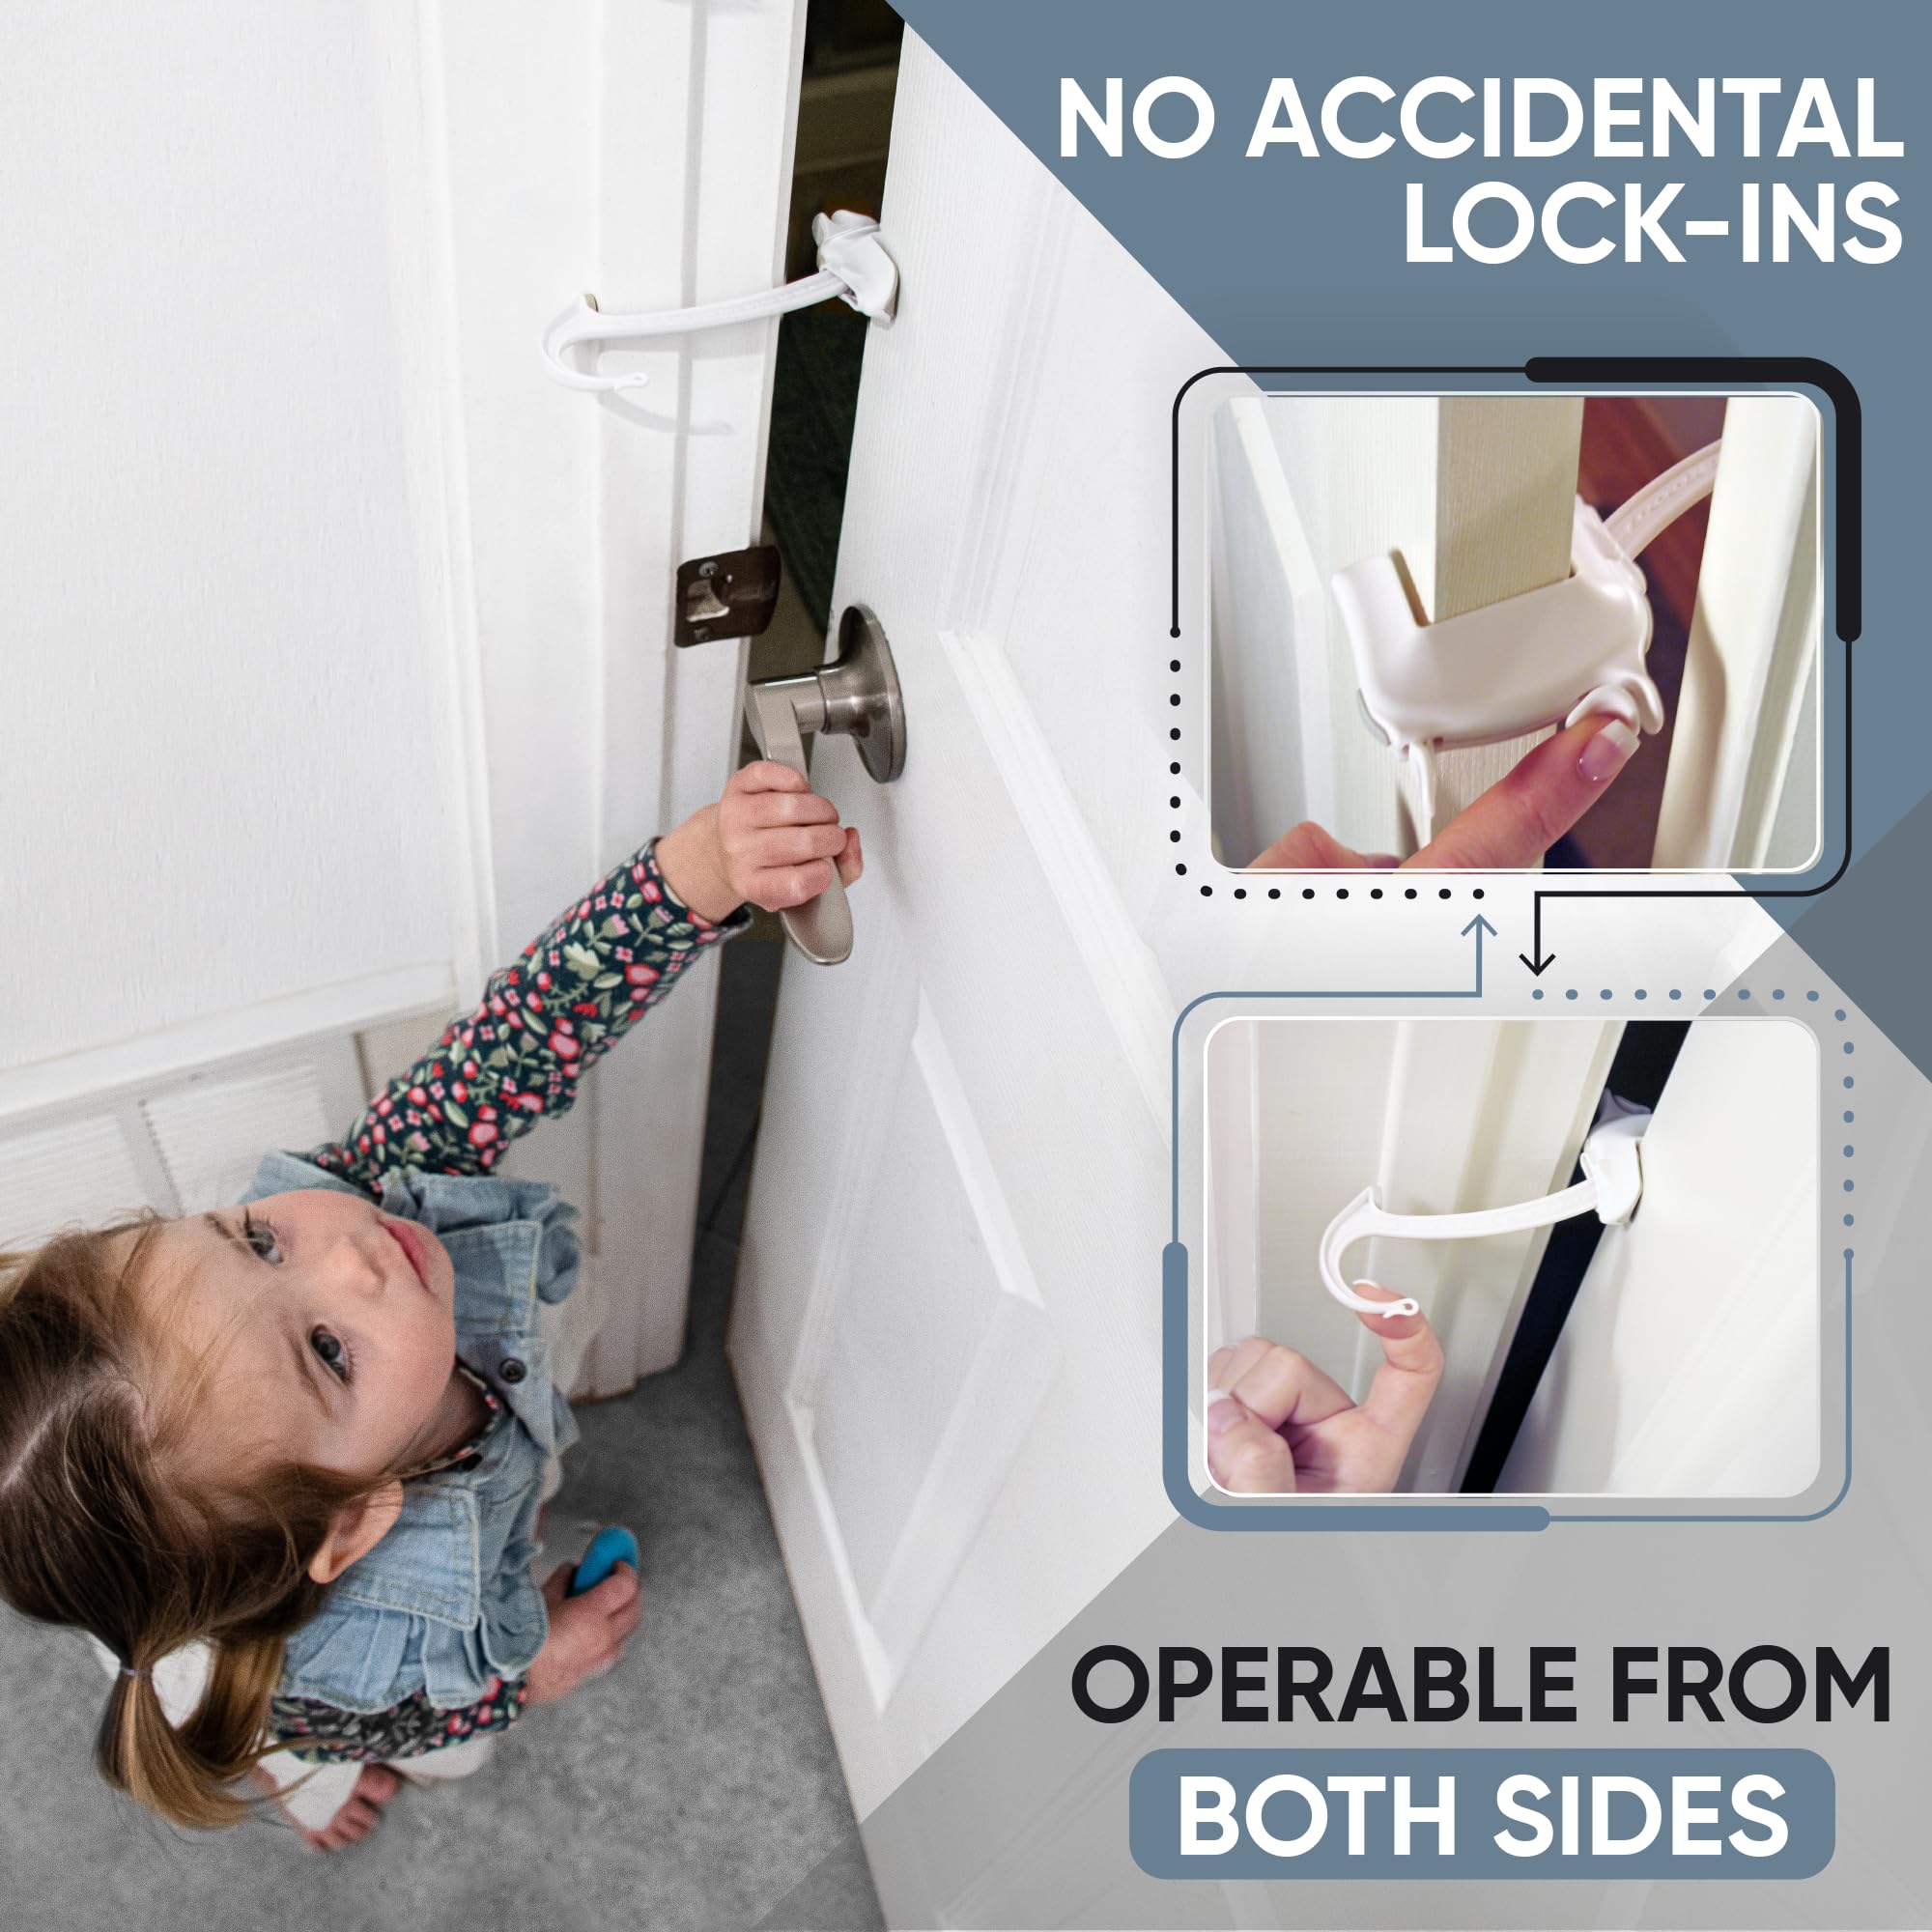 DOOR MONKEY Child Proof Door Lock & Pinch Guard - For Door Knobs & Lever Handles- Easy to Install-No Tools or Tape Required - Baby Safety Door Lock For Kids - Very Portable-Great for Dogs & Cats,White